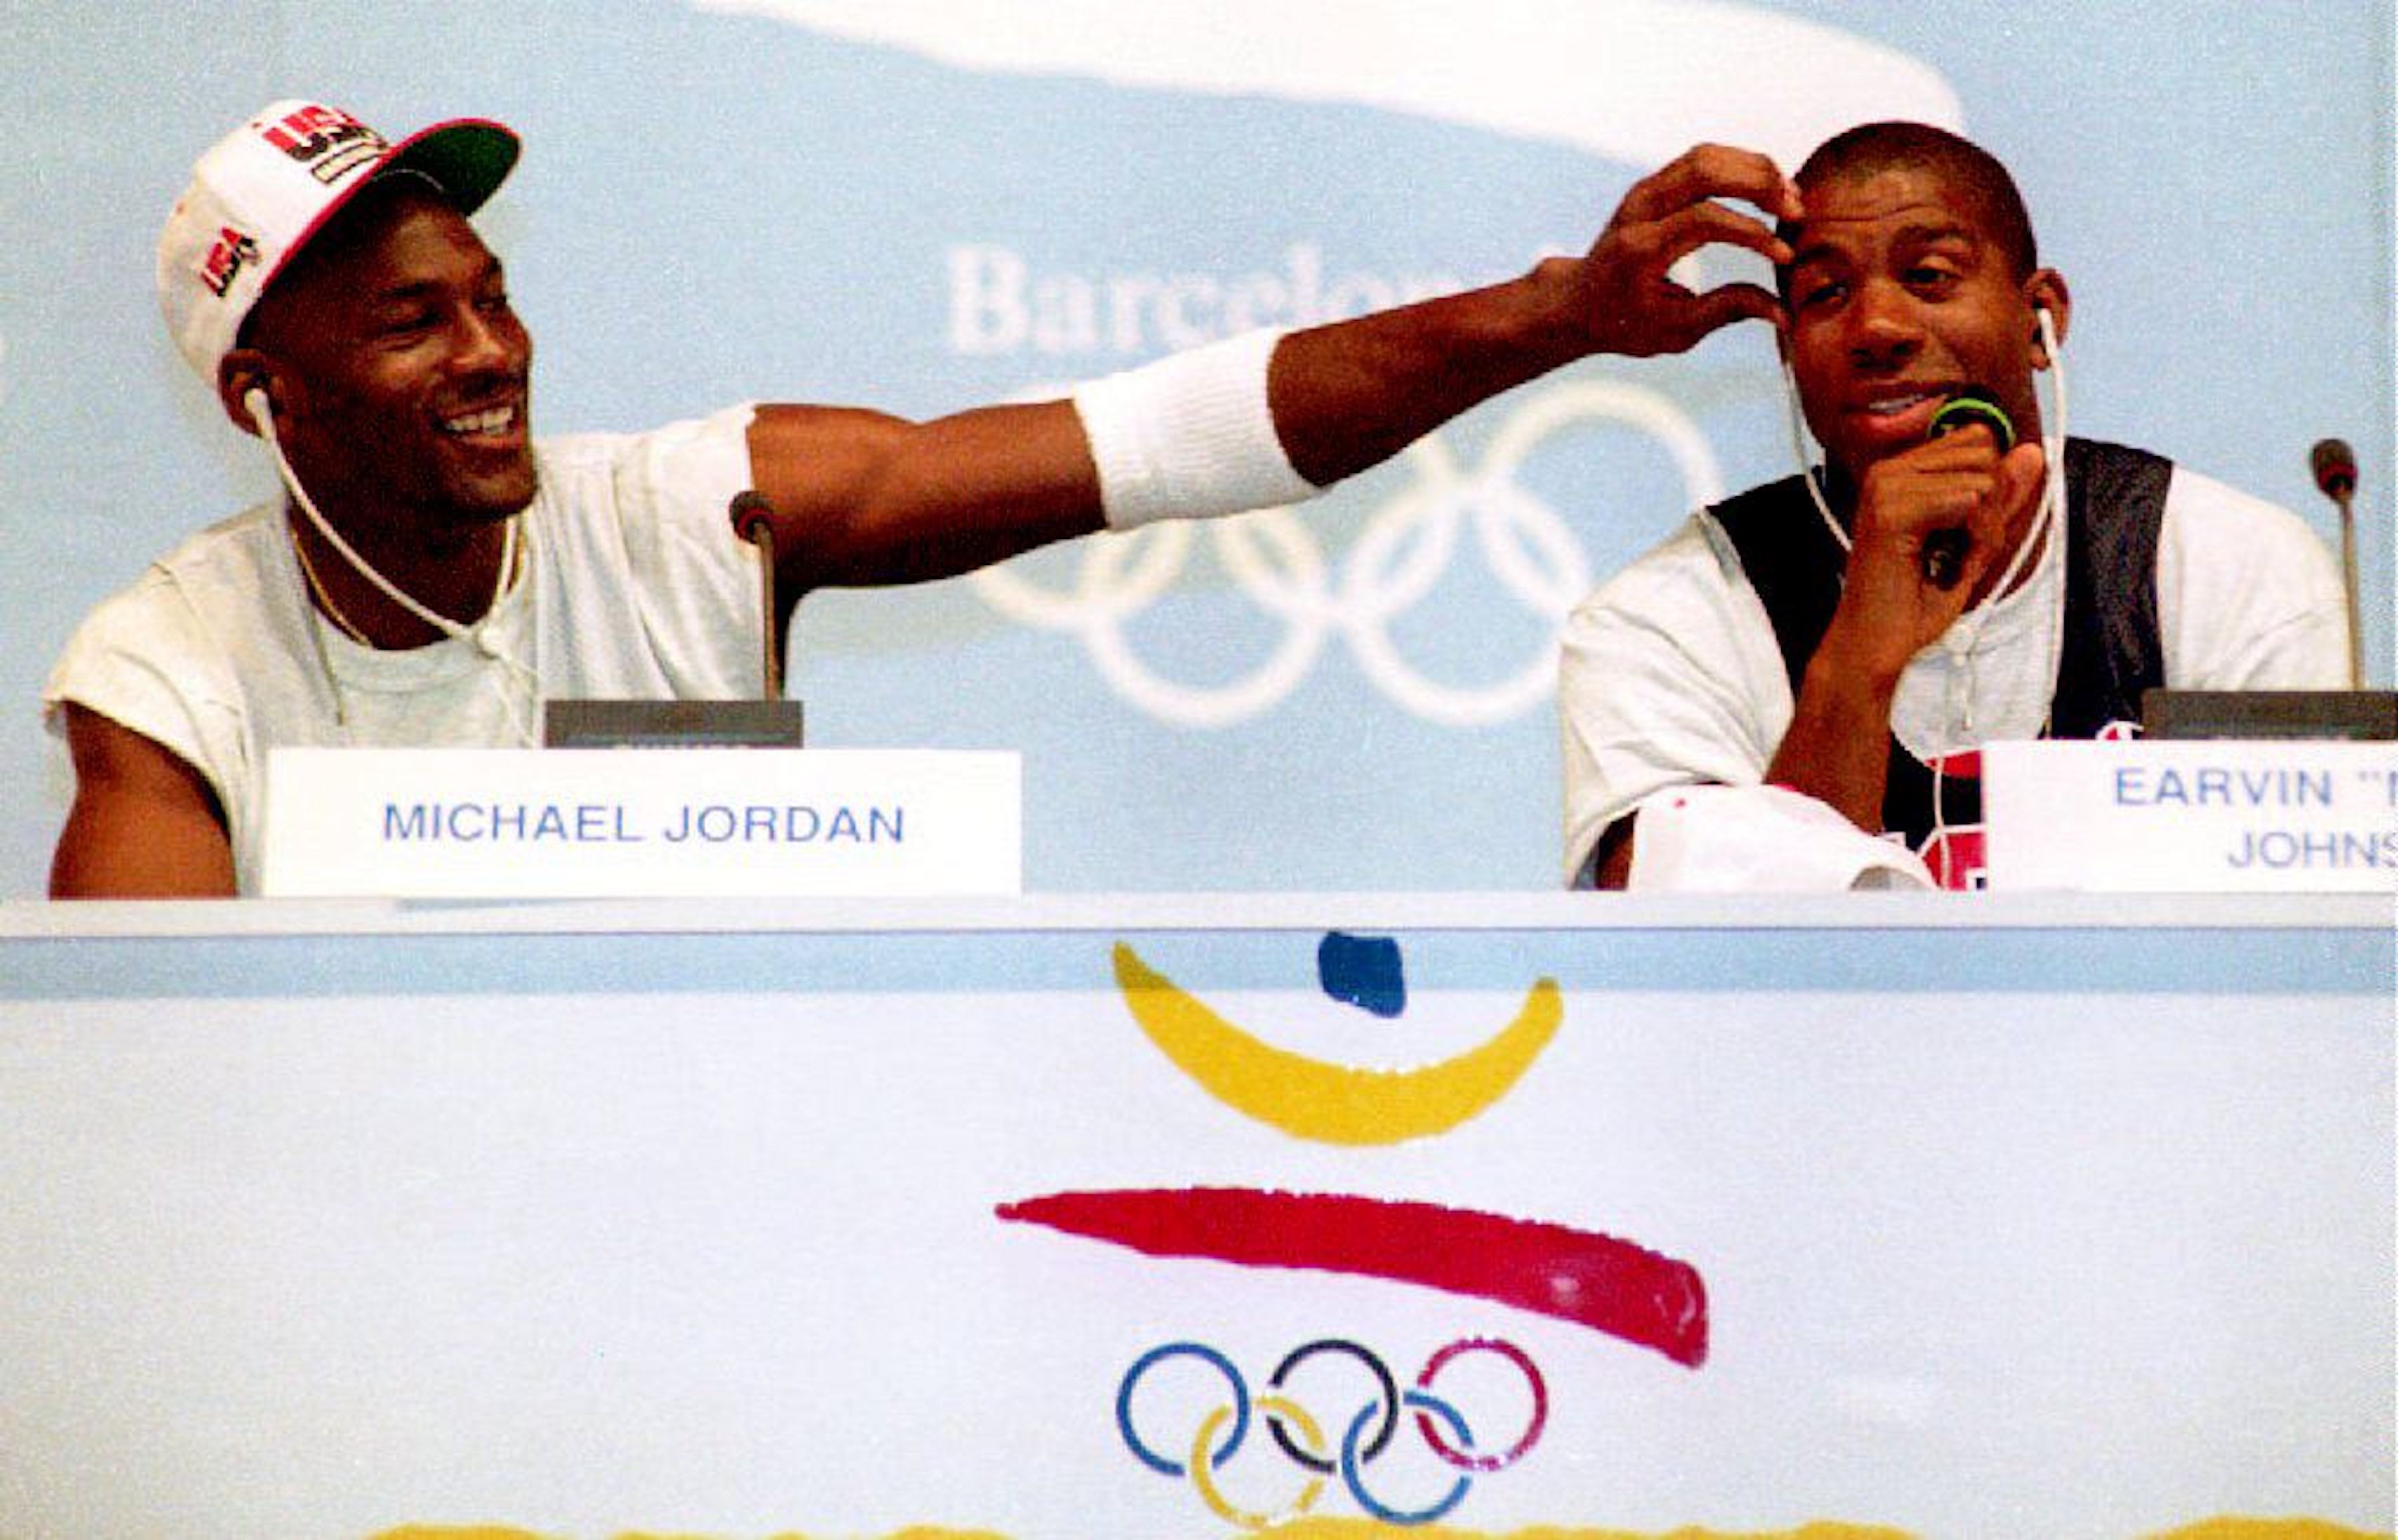 Chicago Bulls legend Michael Jordan jokes with Los Angeles Lakers great Magic Johnson during a Dream Team press conference at the 1992 Olympic Games in Barcelona